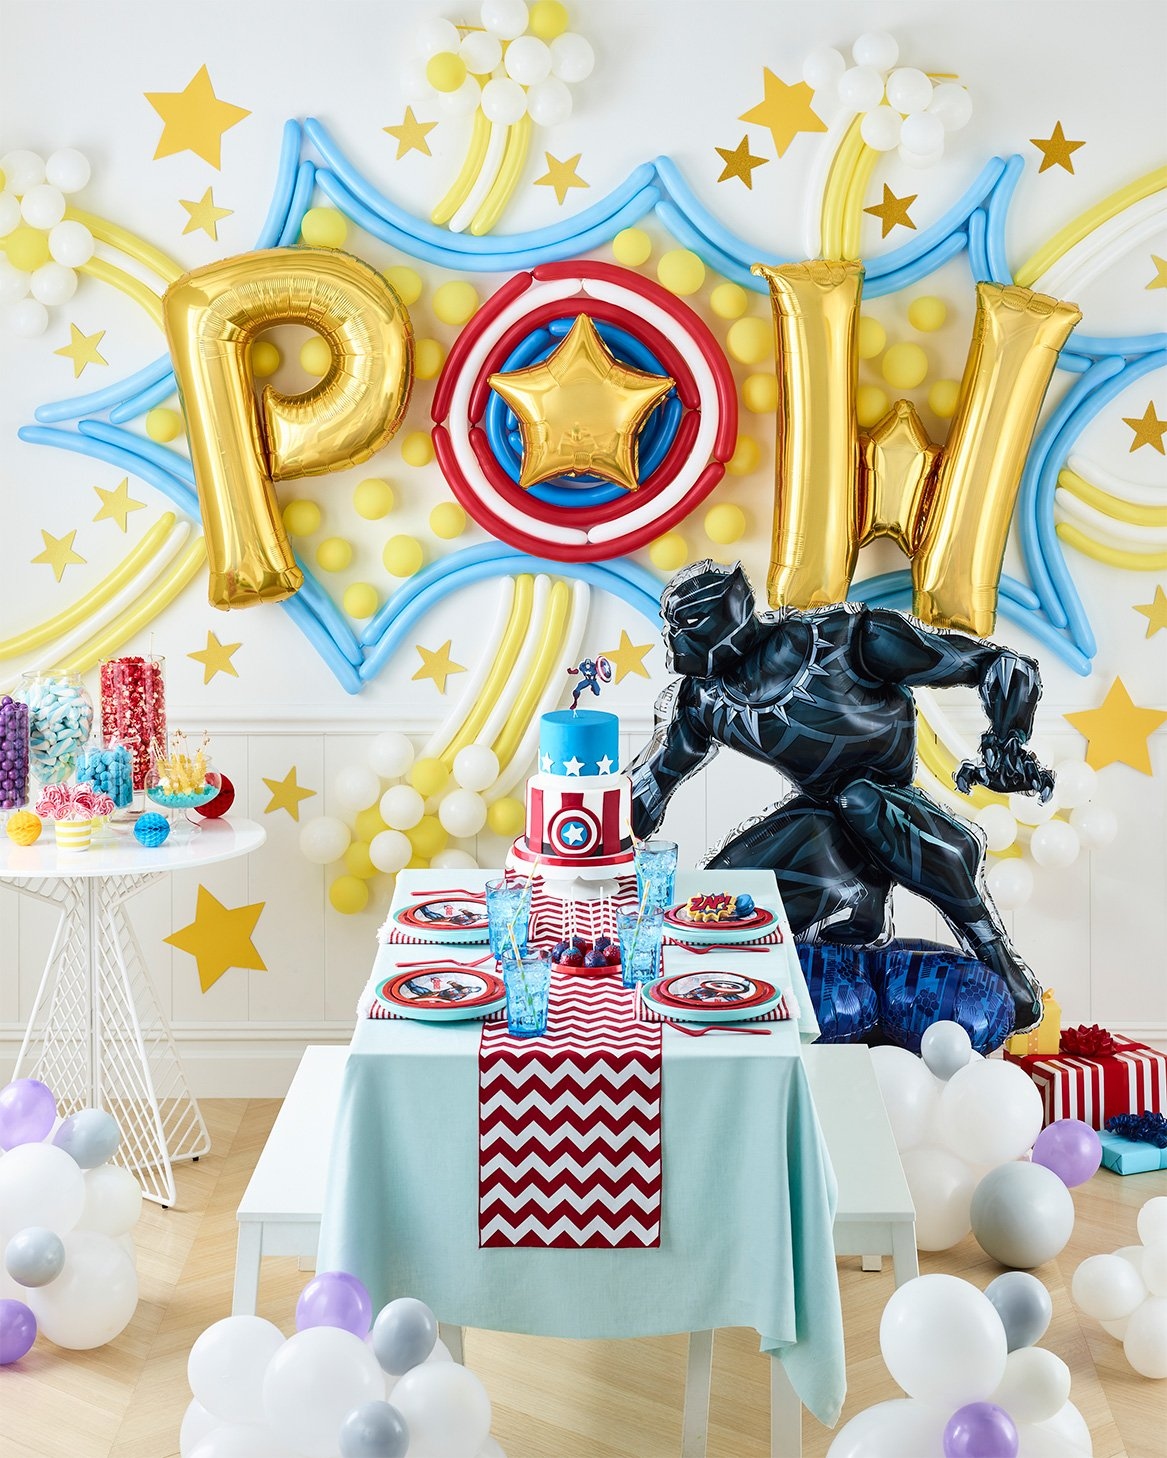 Boys Girls Filled Party Boxes Themed Kids Superhero Party Supplies Ready Made 